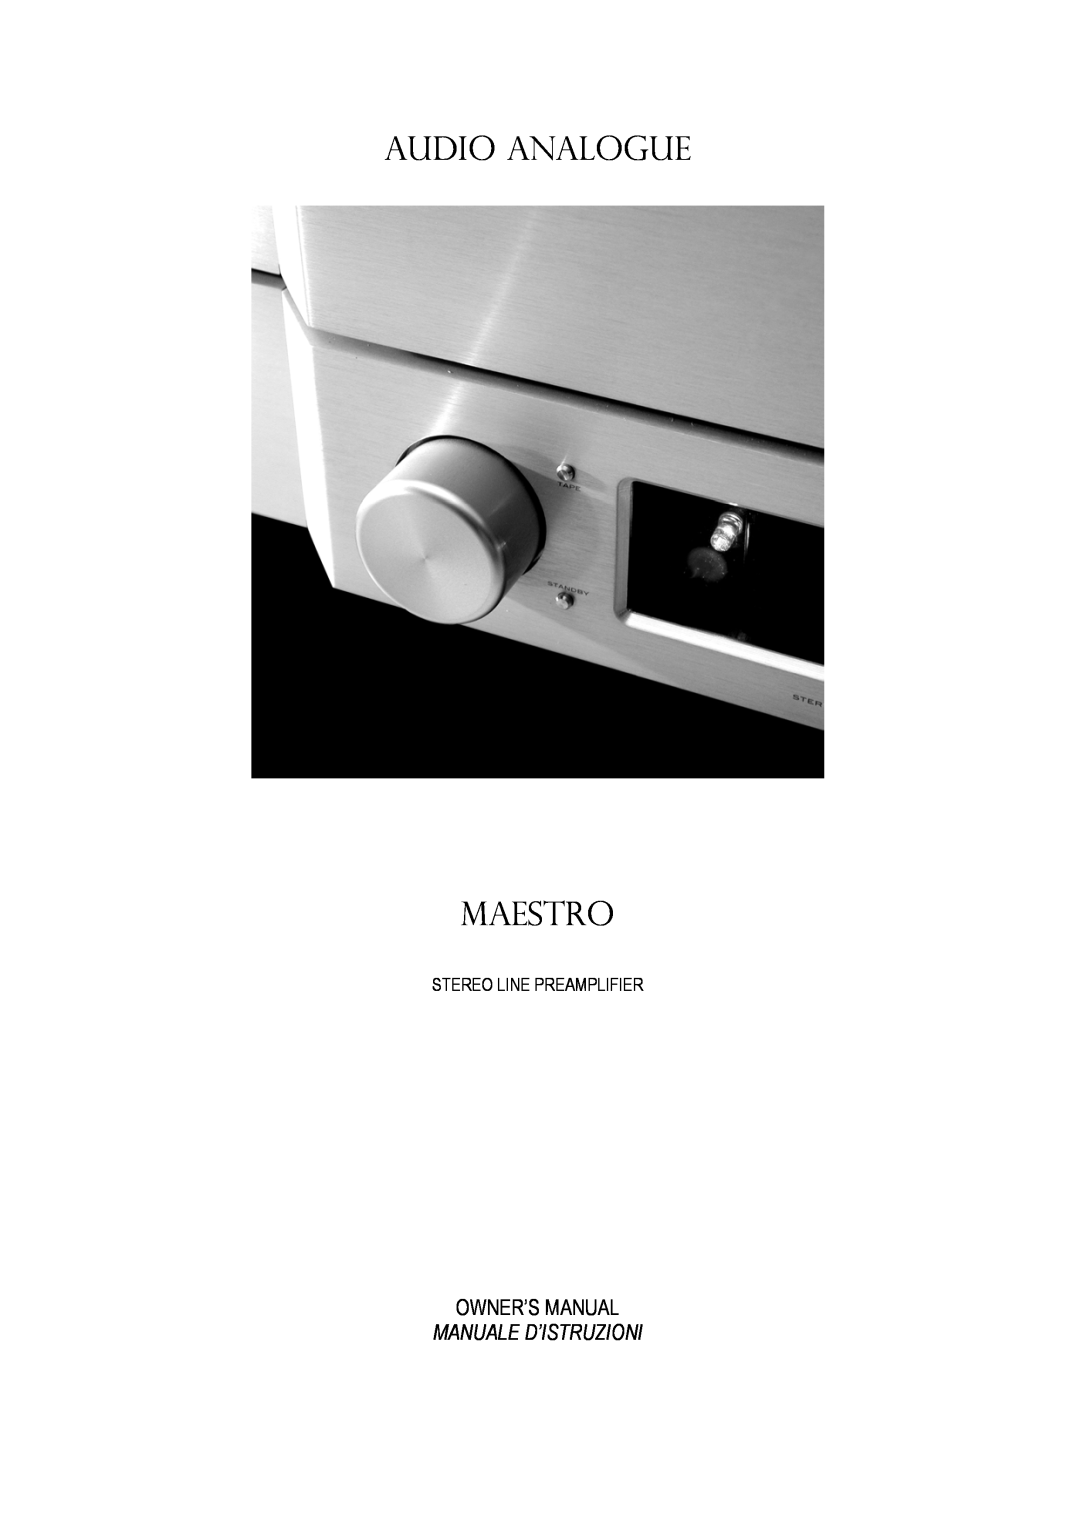 Audio Analogue SRL STEREO LINE PREAMPLIFIER owner manual Manuale D’Istruzioni, Audio Analogue, maestro 